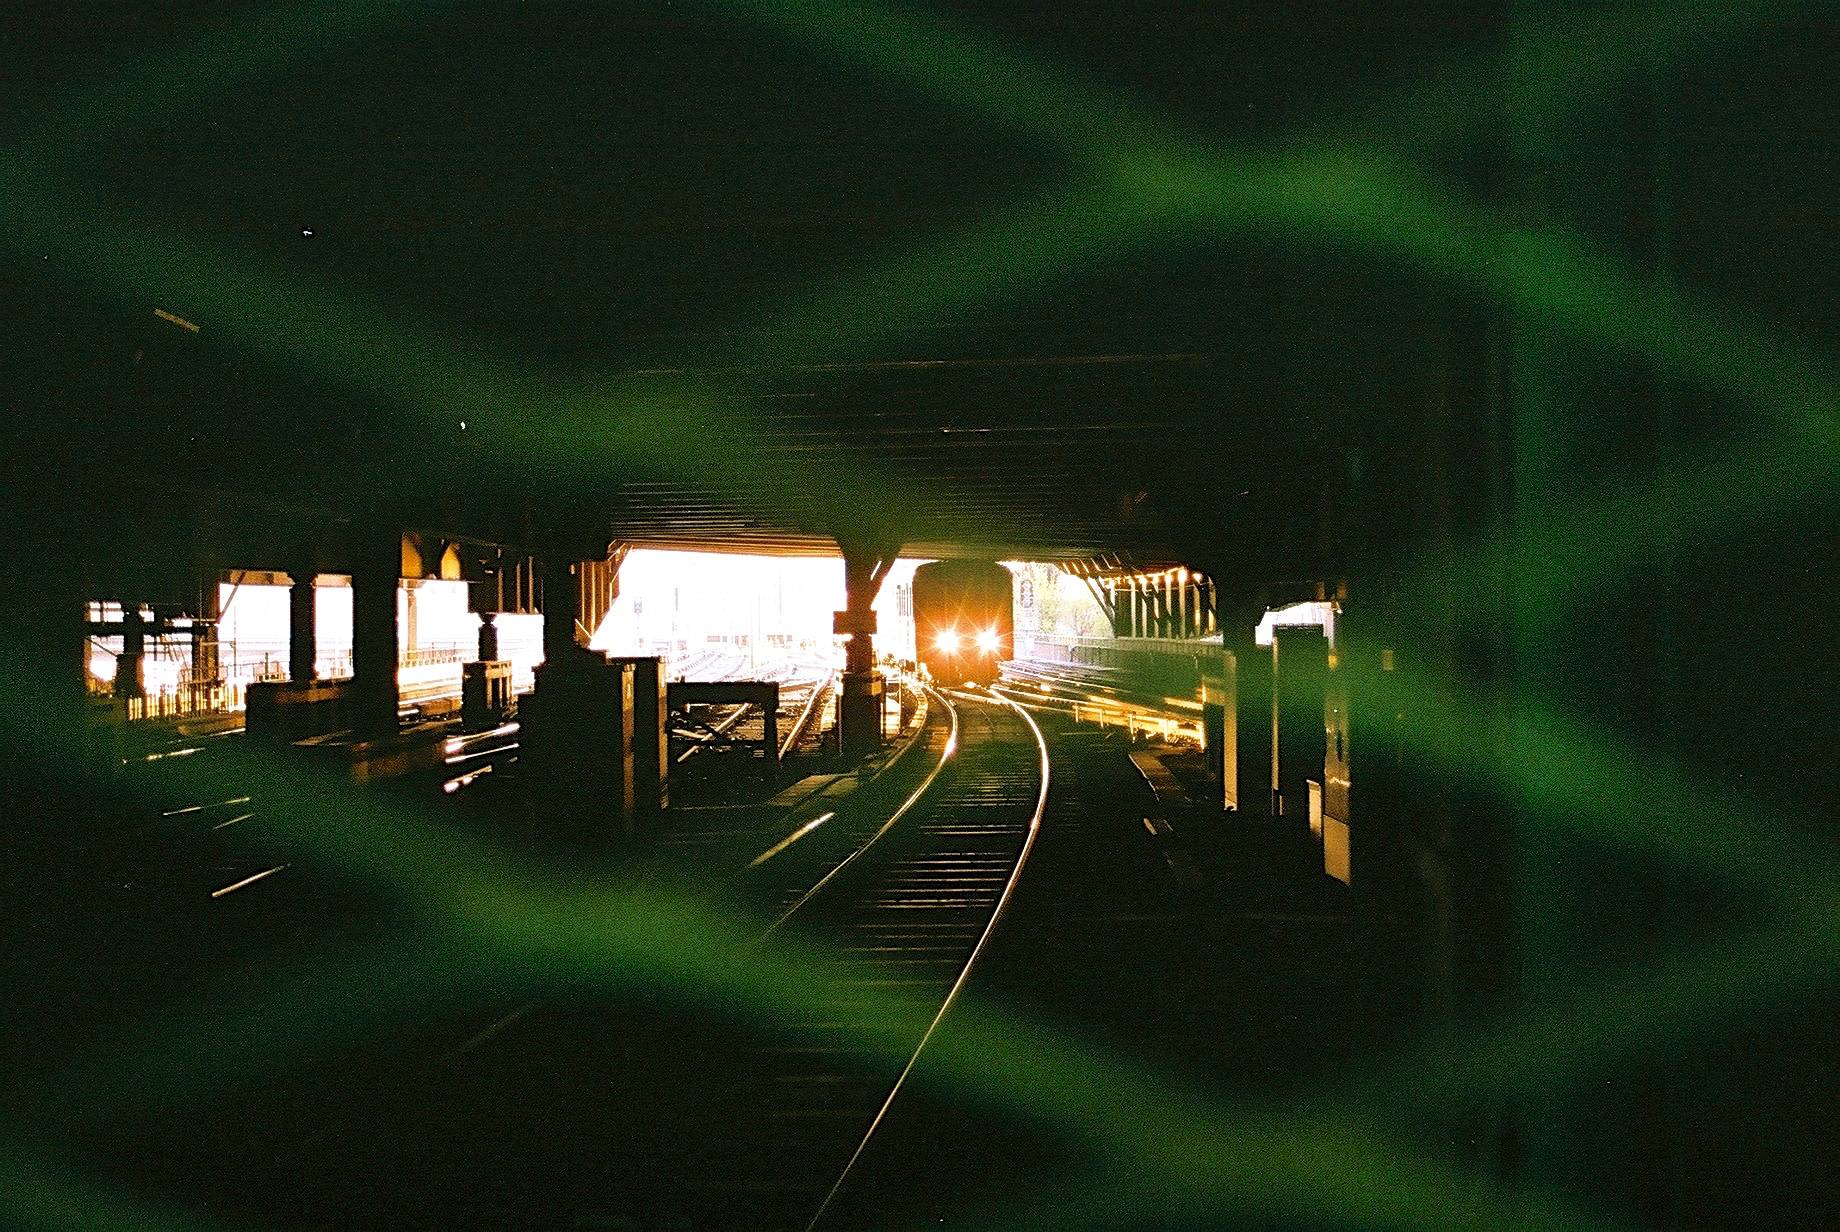 train headlights seen through the woven metal fence at end of the dark tunnel